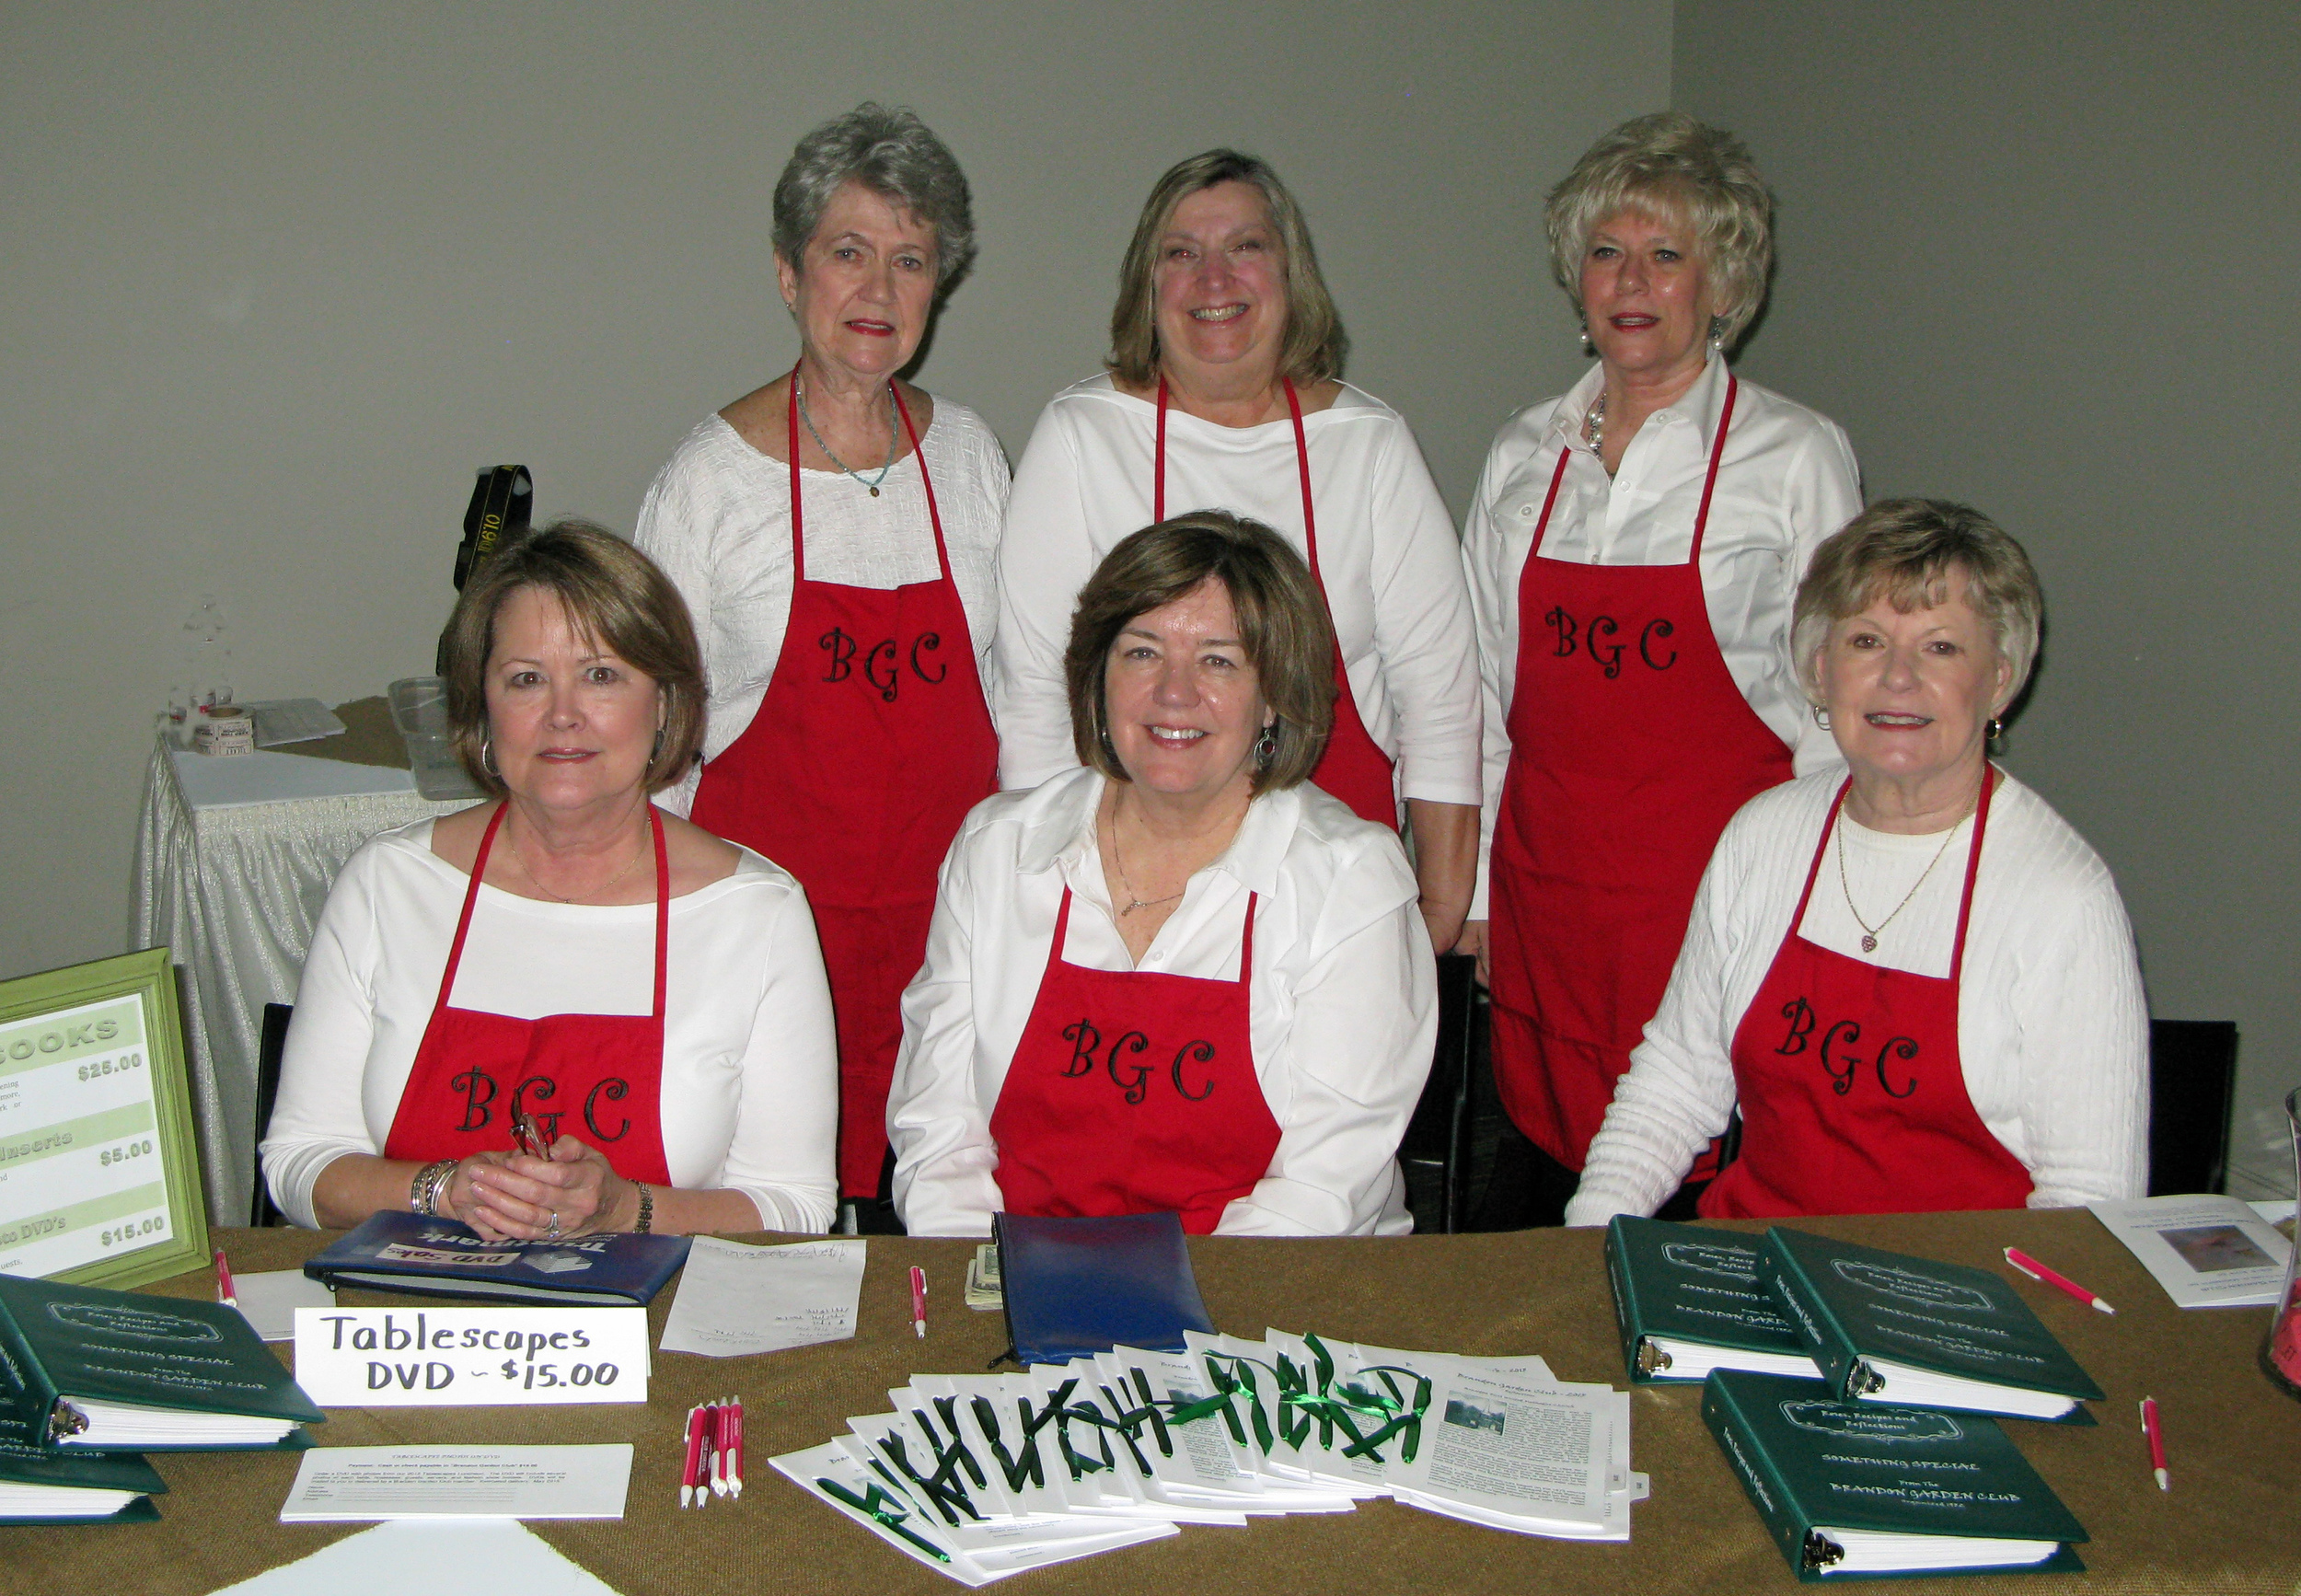   At Brandon Garden Club’s eighth annual&nbsp;  Tablescapes  &nbsp;Luncheon, guests had opportunities to purchase cookbooks and cookbook inserts, DVDs with over 1,000 photos of the event, and drawing tickets for a fully decorated&nbsp;  table  &nbsp;